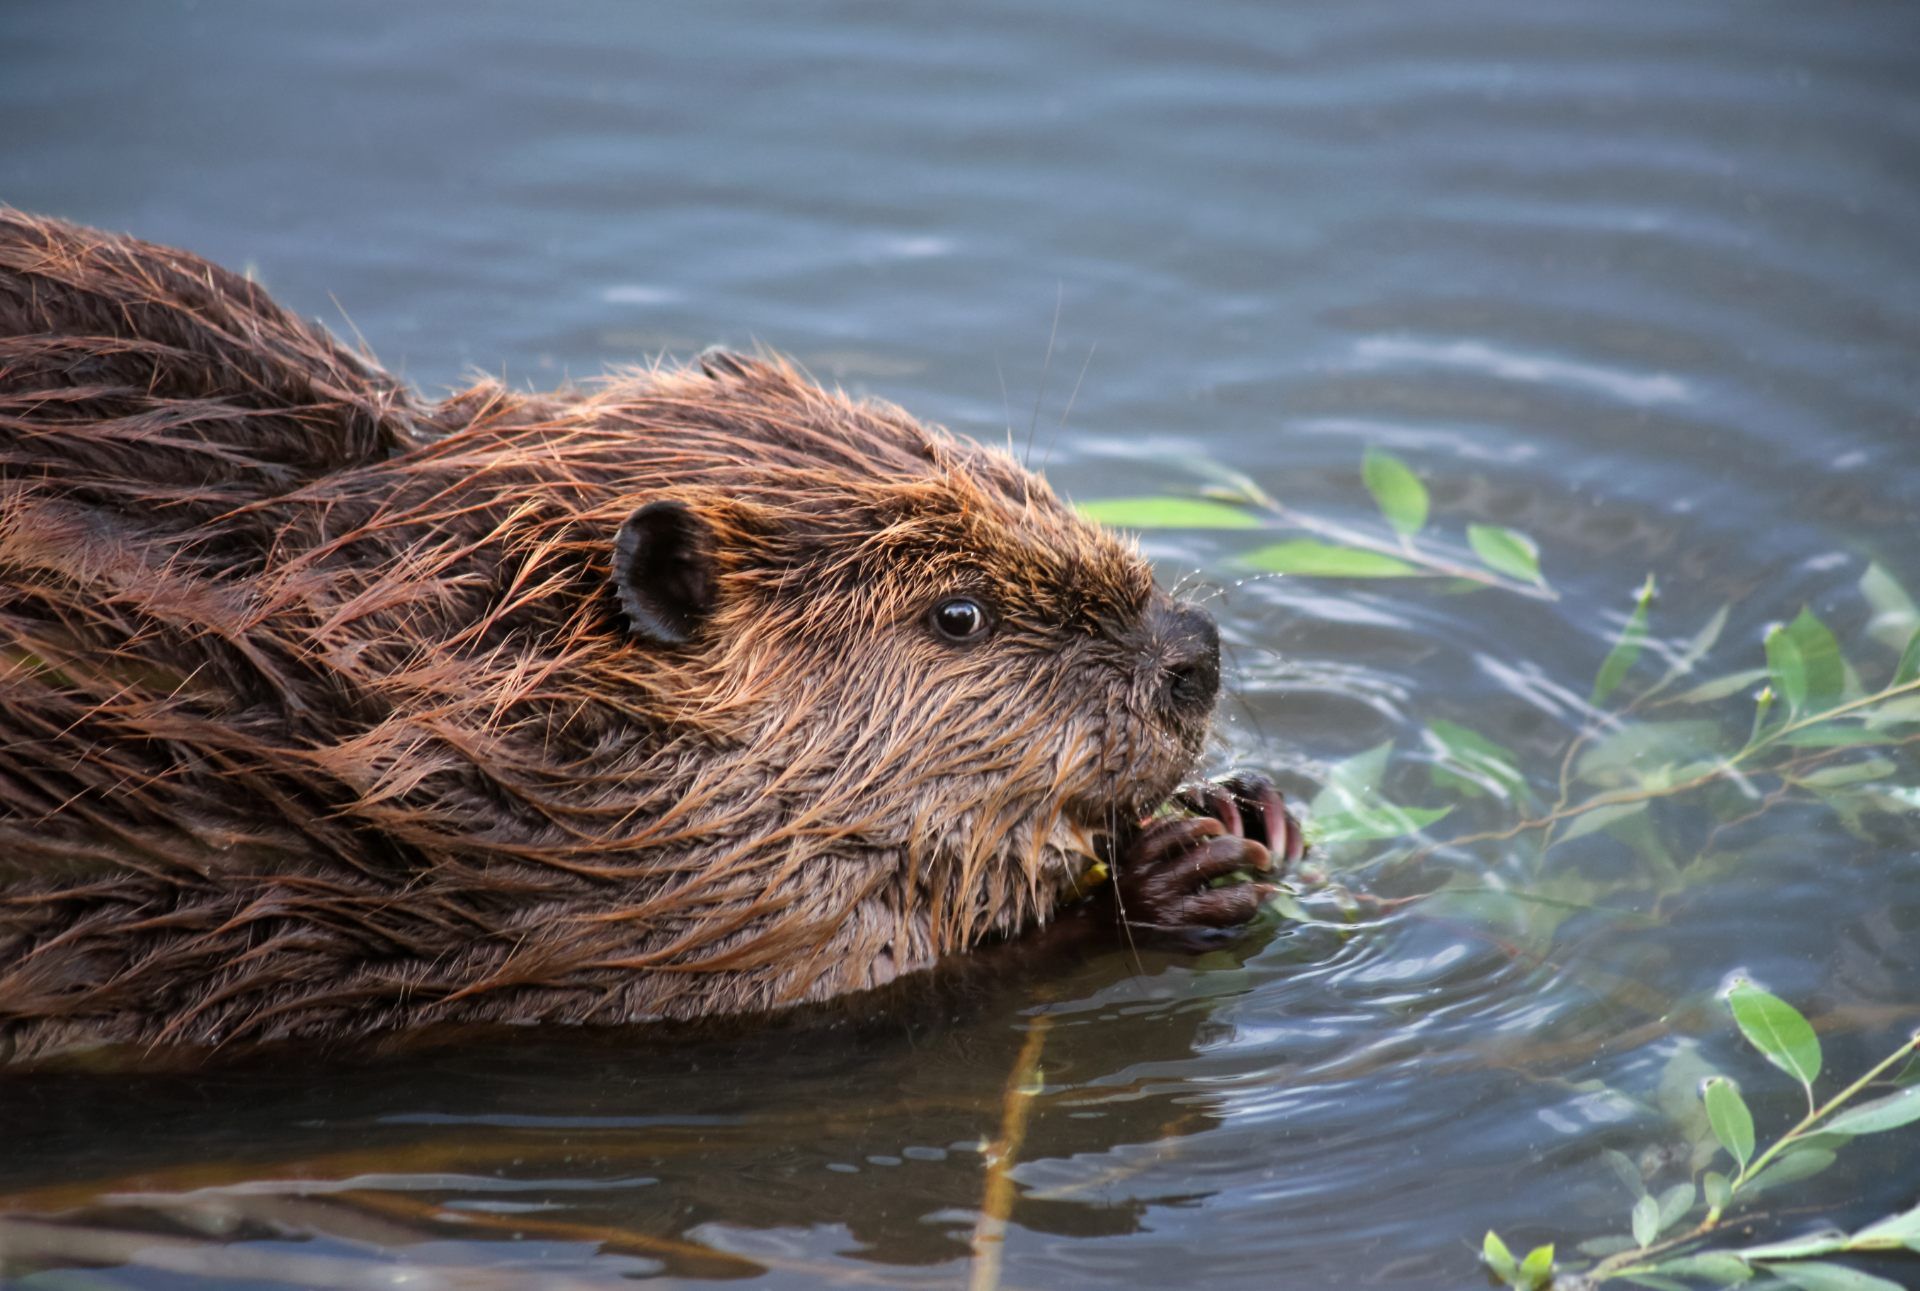 Beaver swimming - right to remain